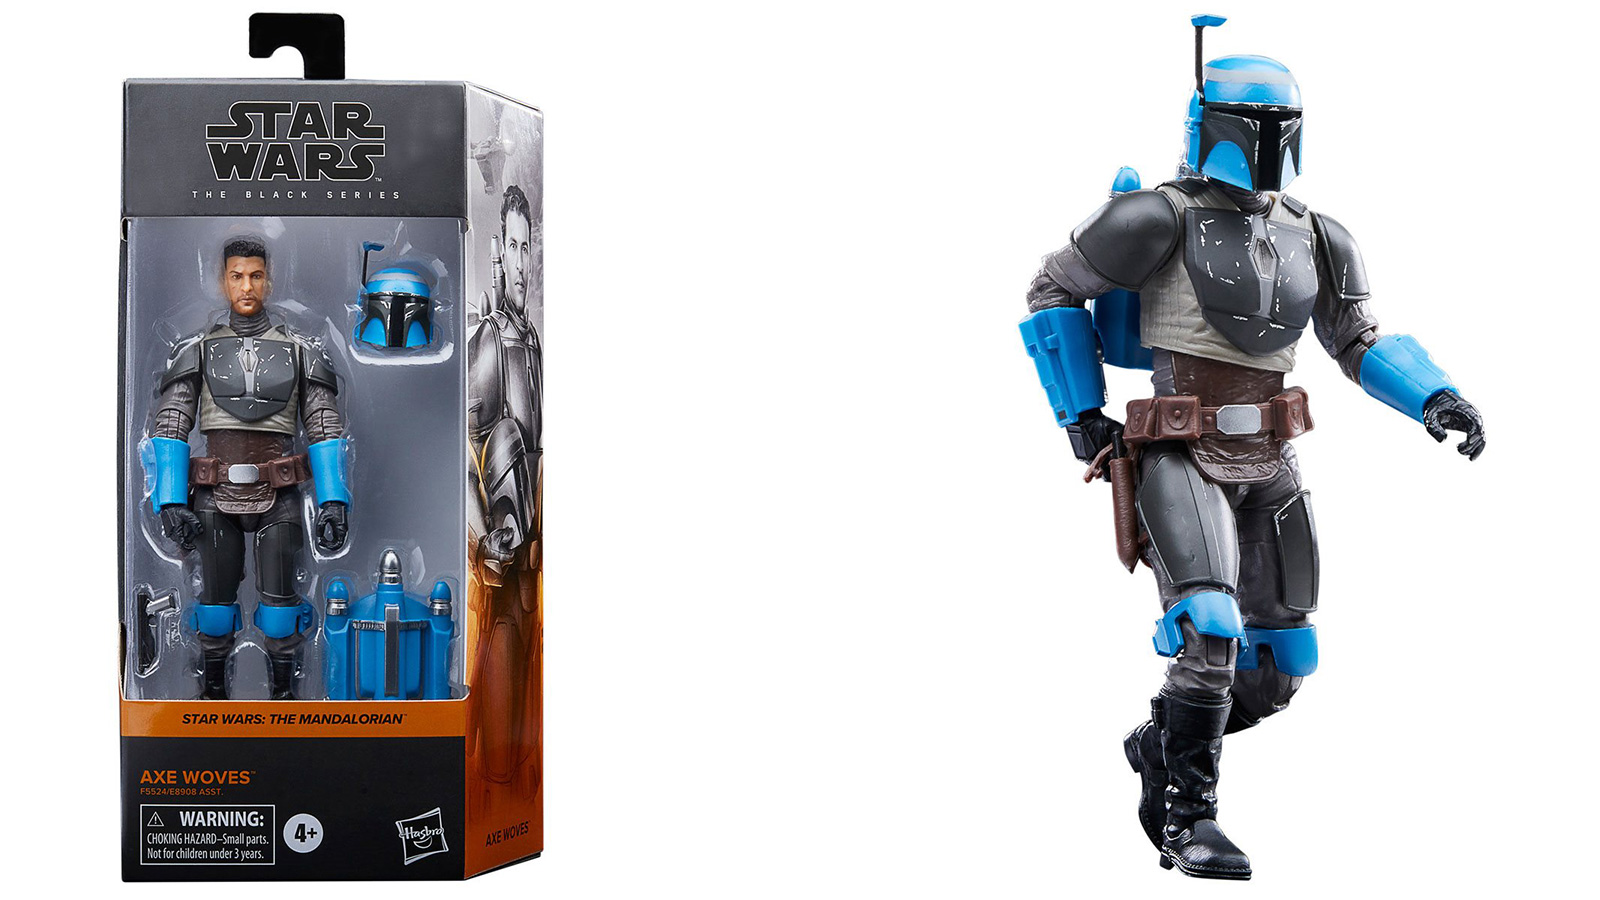 In Stock at Entertainment Earth - The Black Series 6-Inch Axe Woves Figure